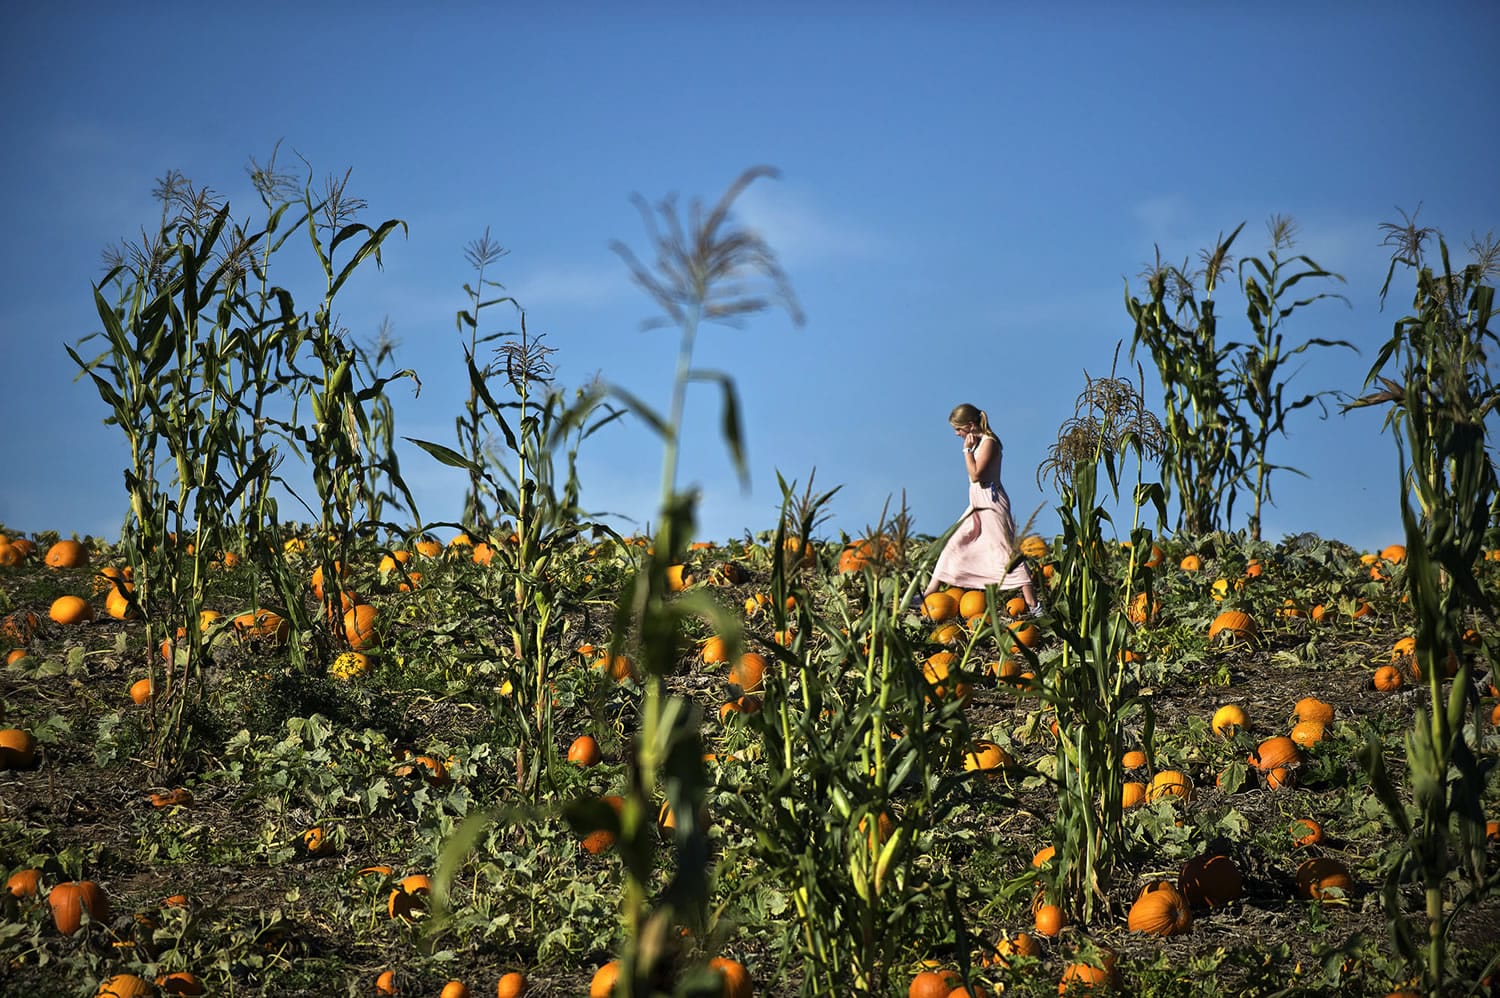 Halley Copper, 11, of Battle Ground, walks through the pumpkin patch at Bi-Zi Farms in October 2014.